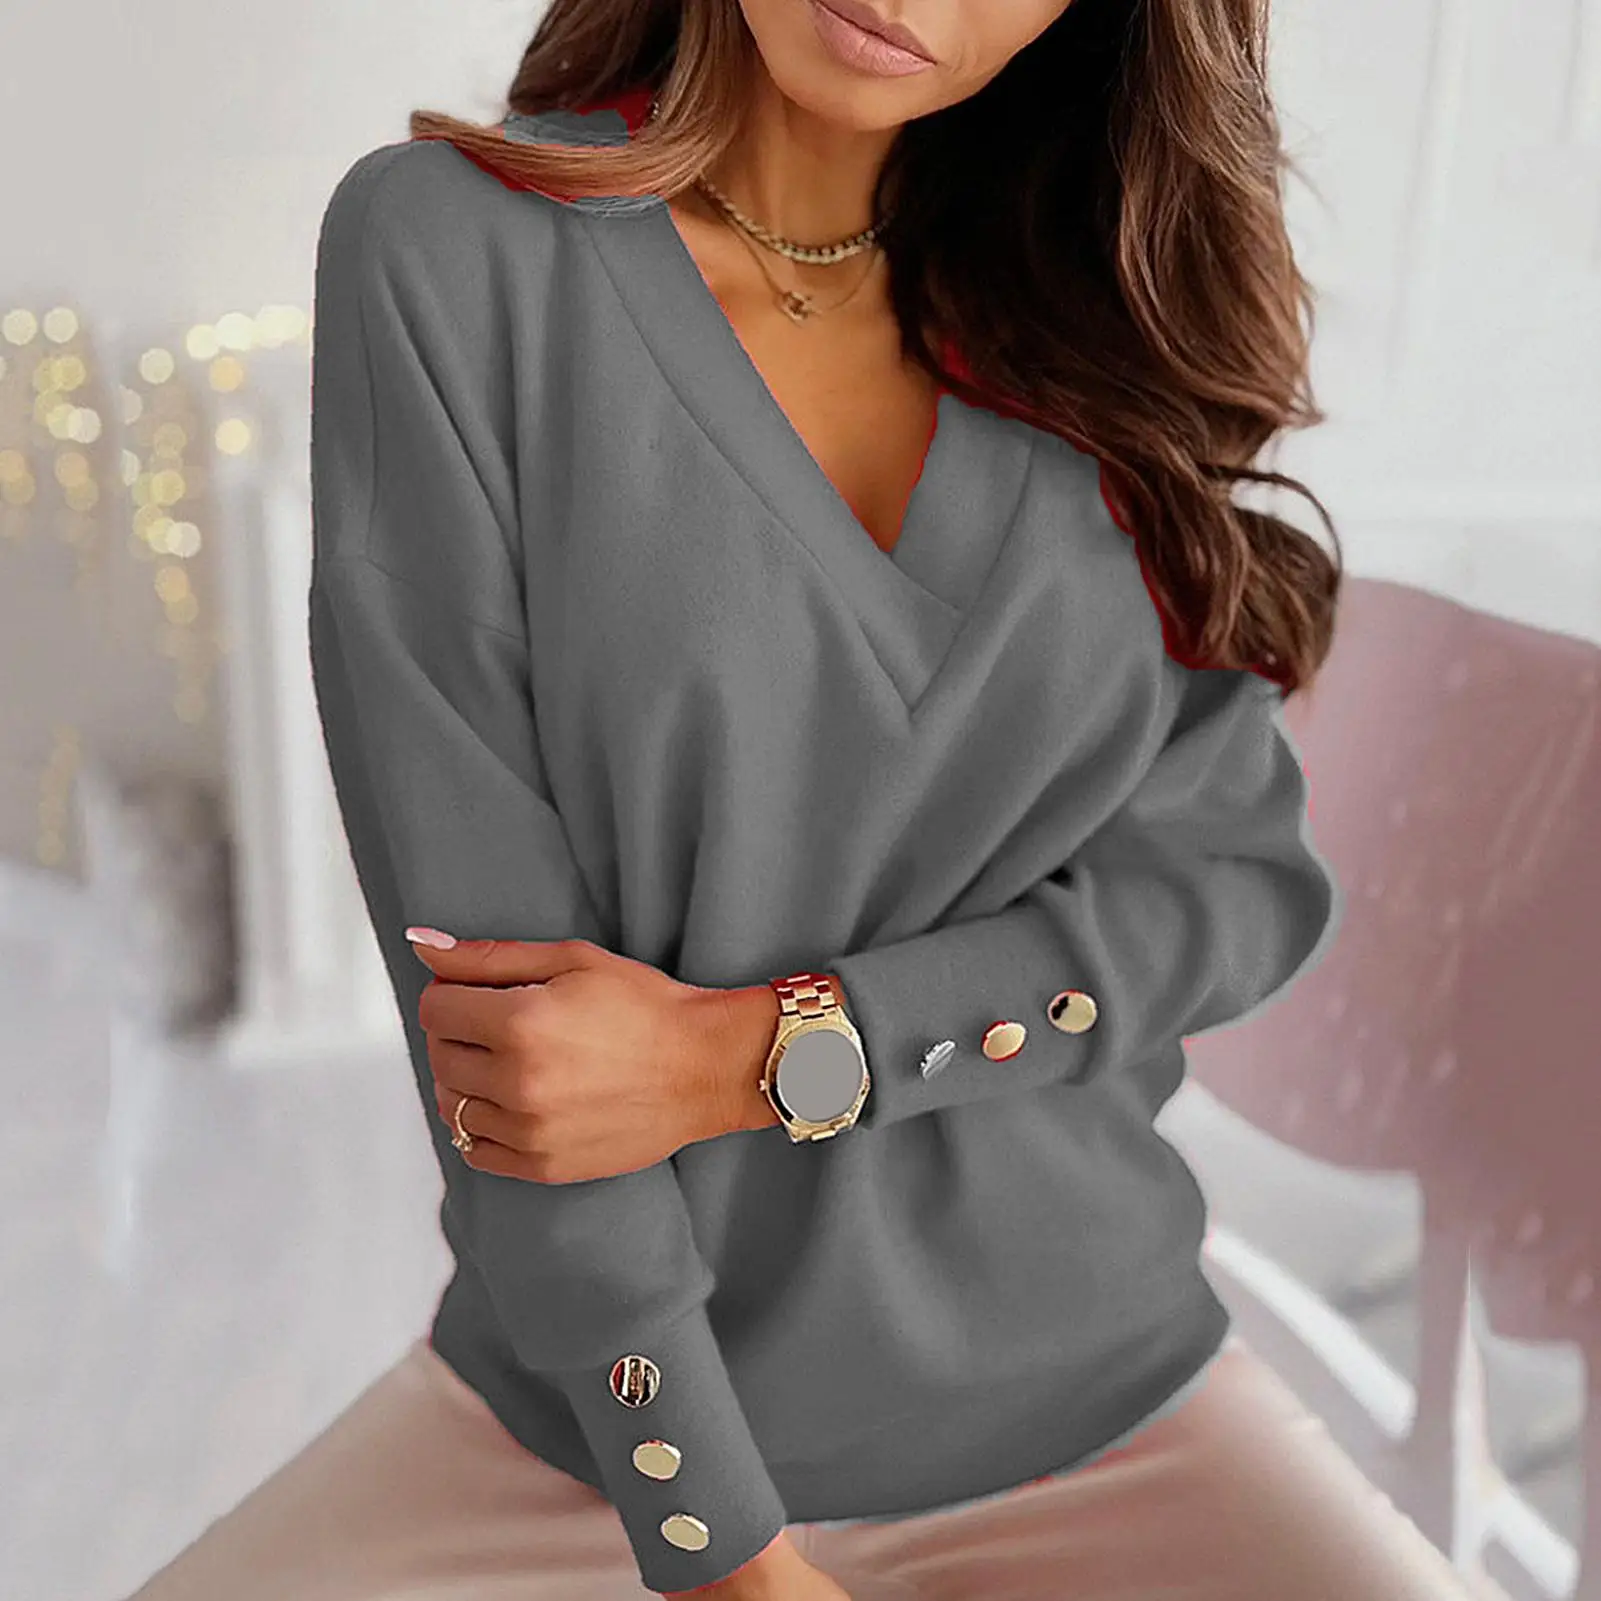 Women's sweater Autumn Solid Color Deep V Neck Pocket Single-breasted Long Sleeve Pullover Knitted Cardigan Tops 2020 Oversized